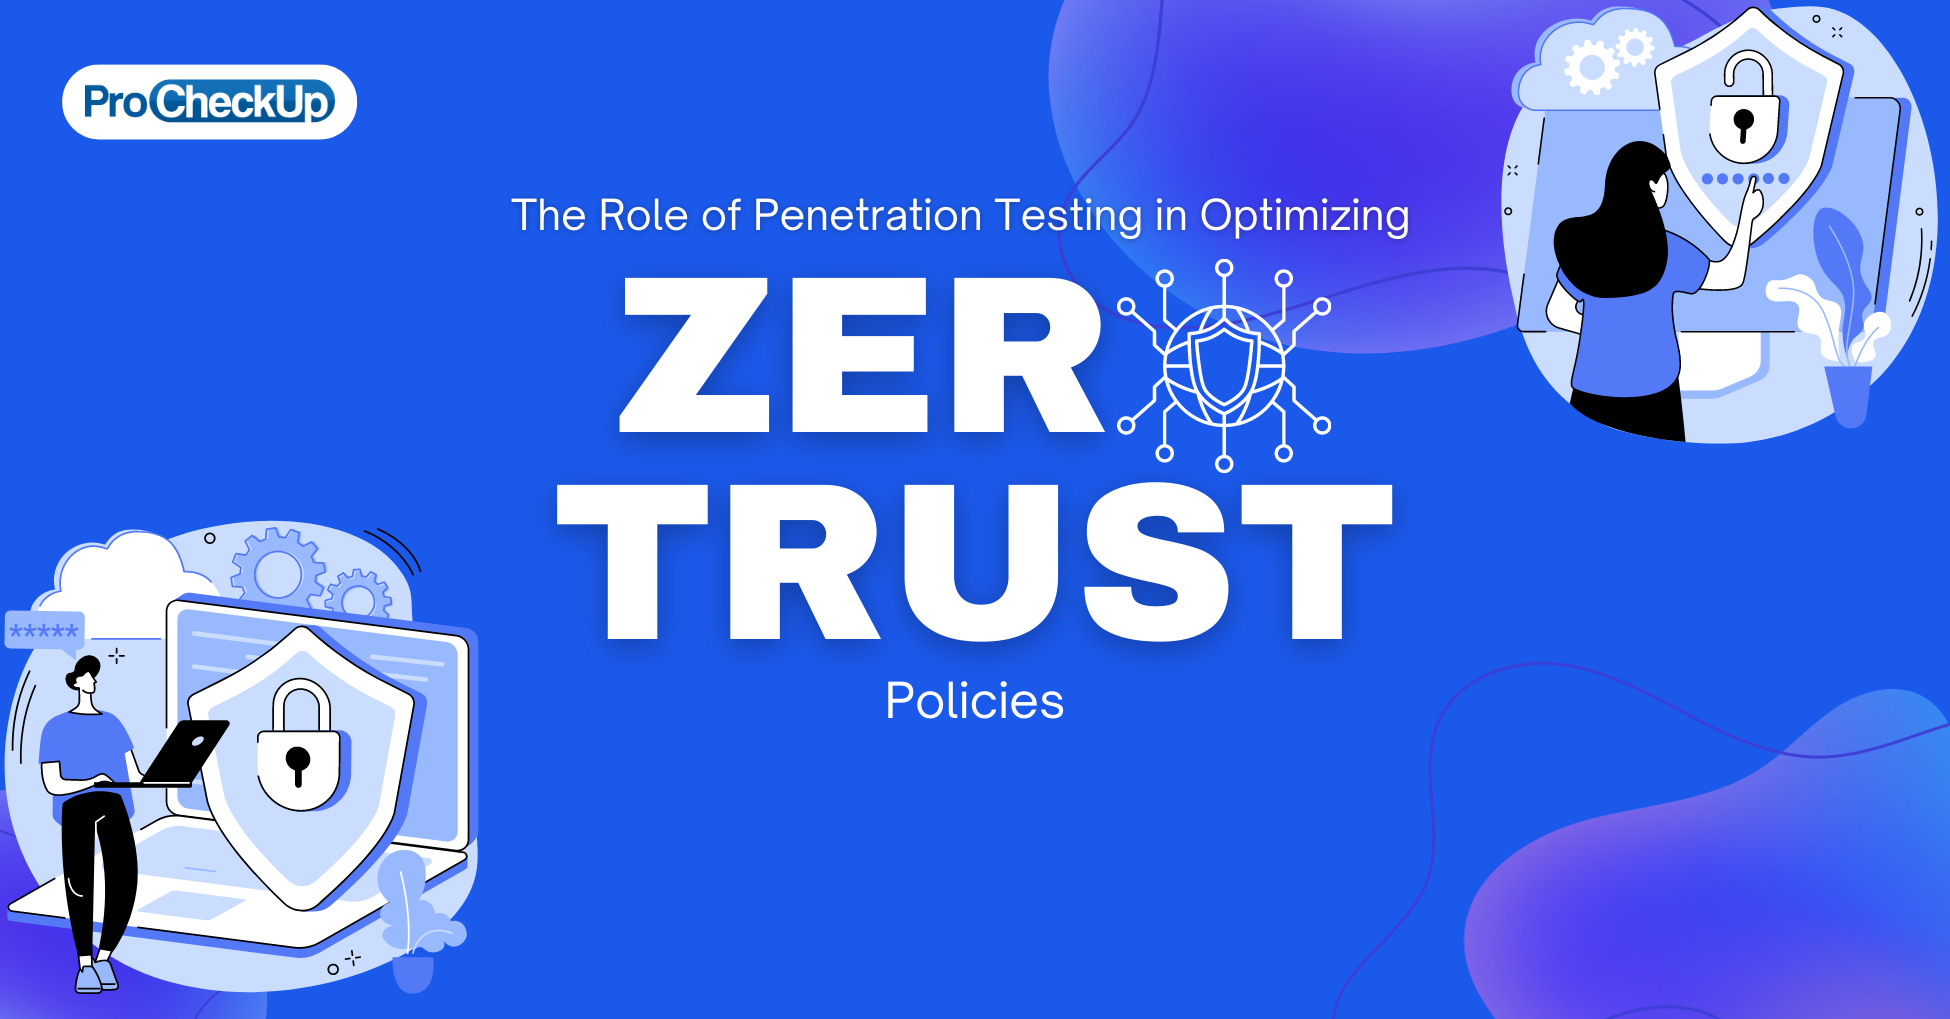 The Role of Penetration Testing in Optimizing Zero Trust Policies